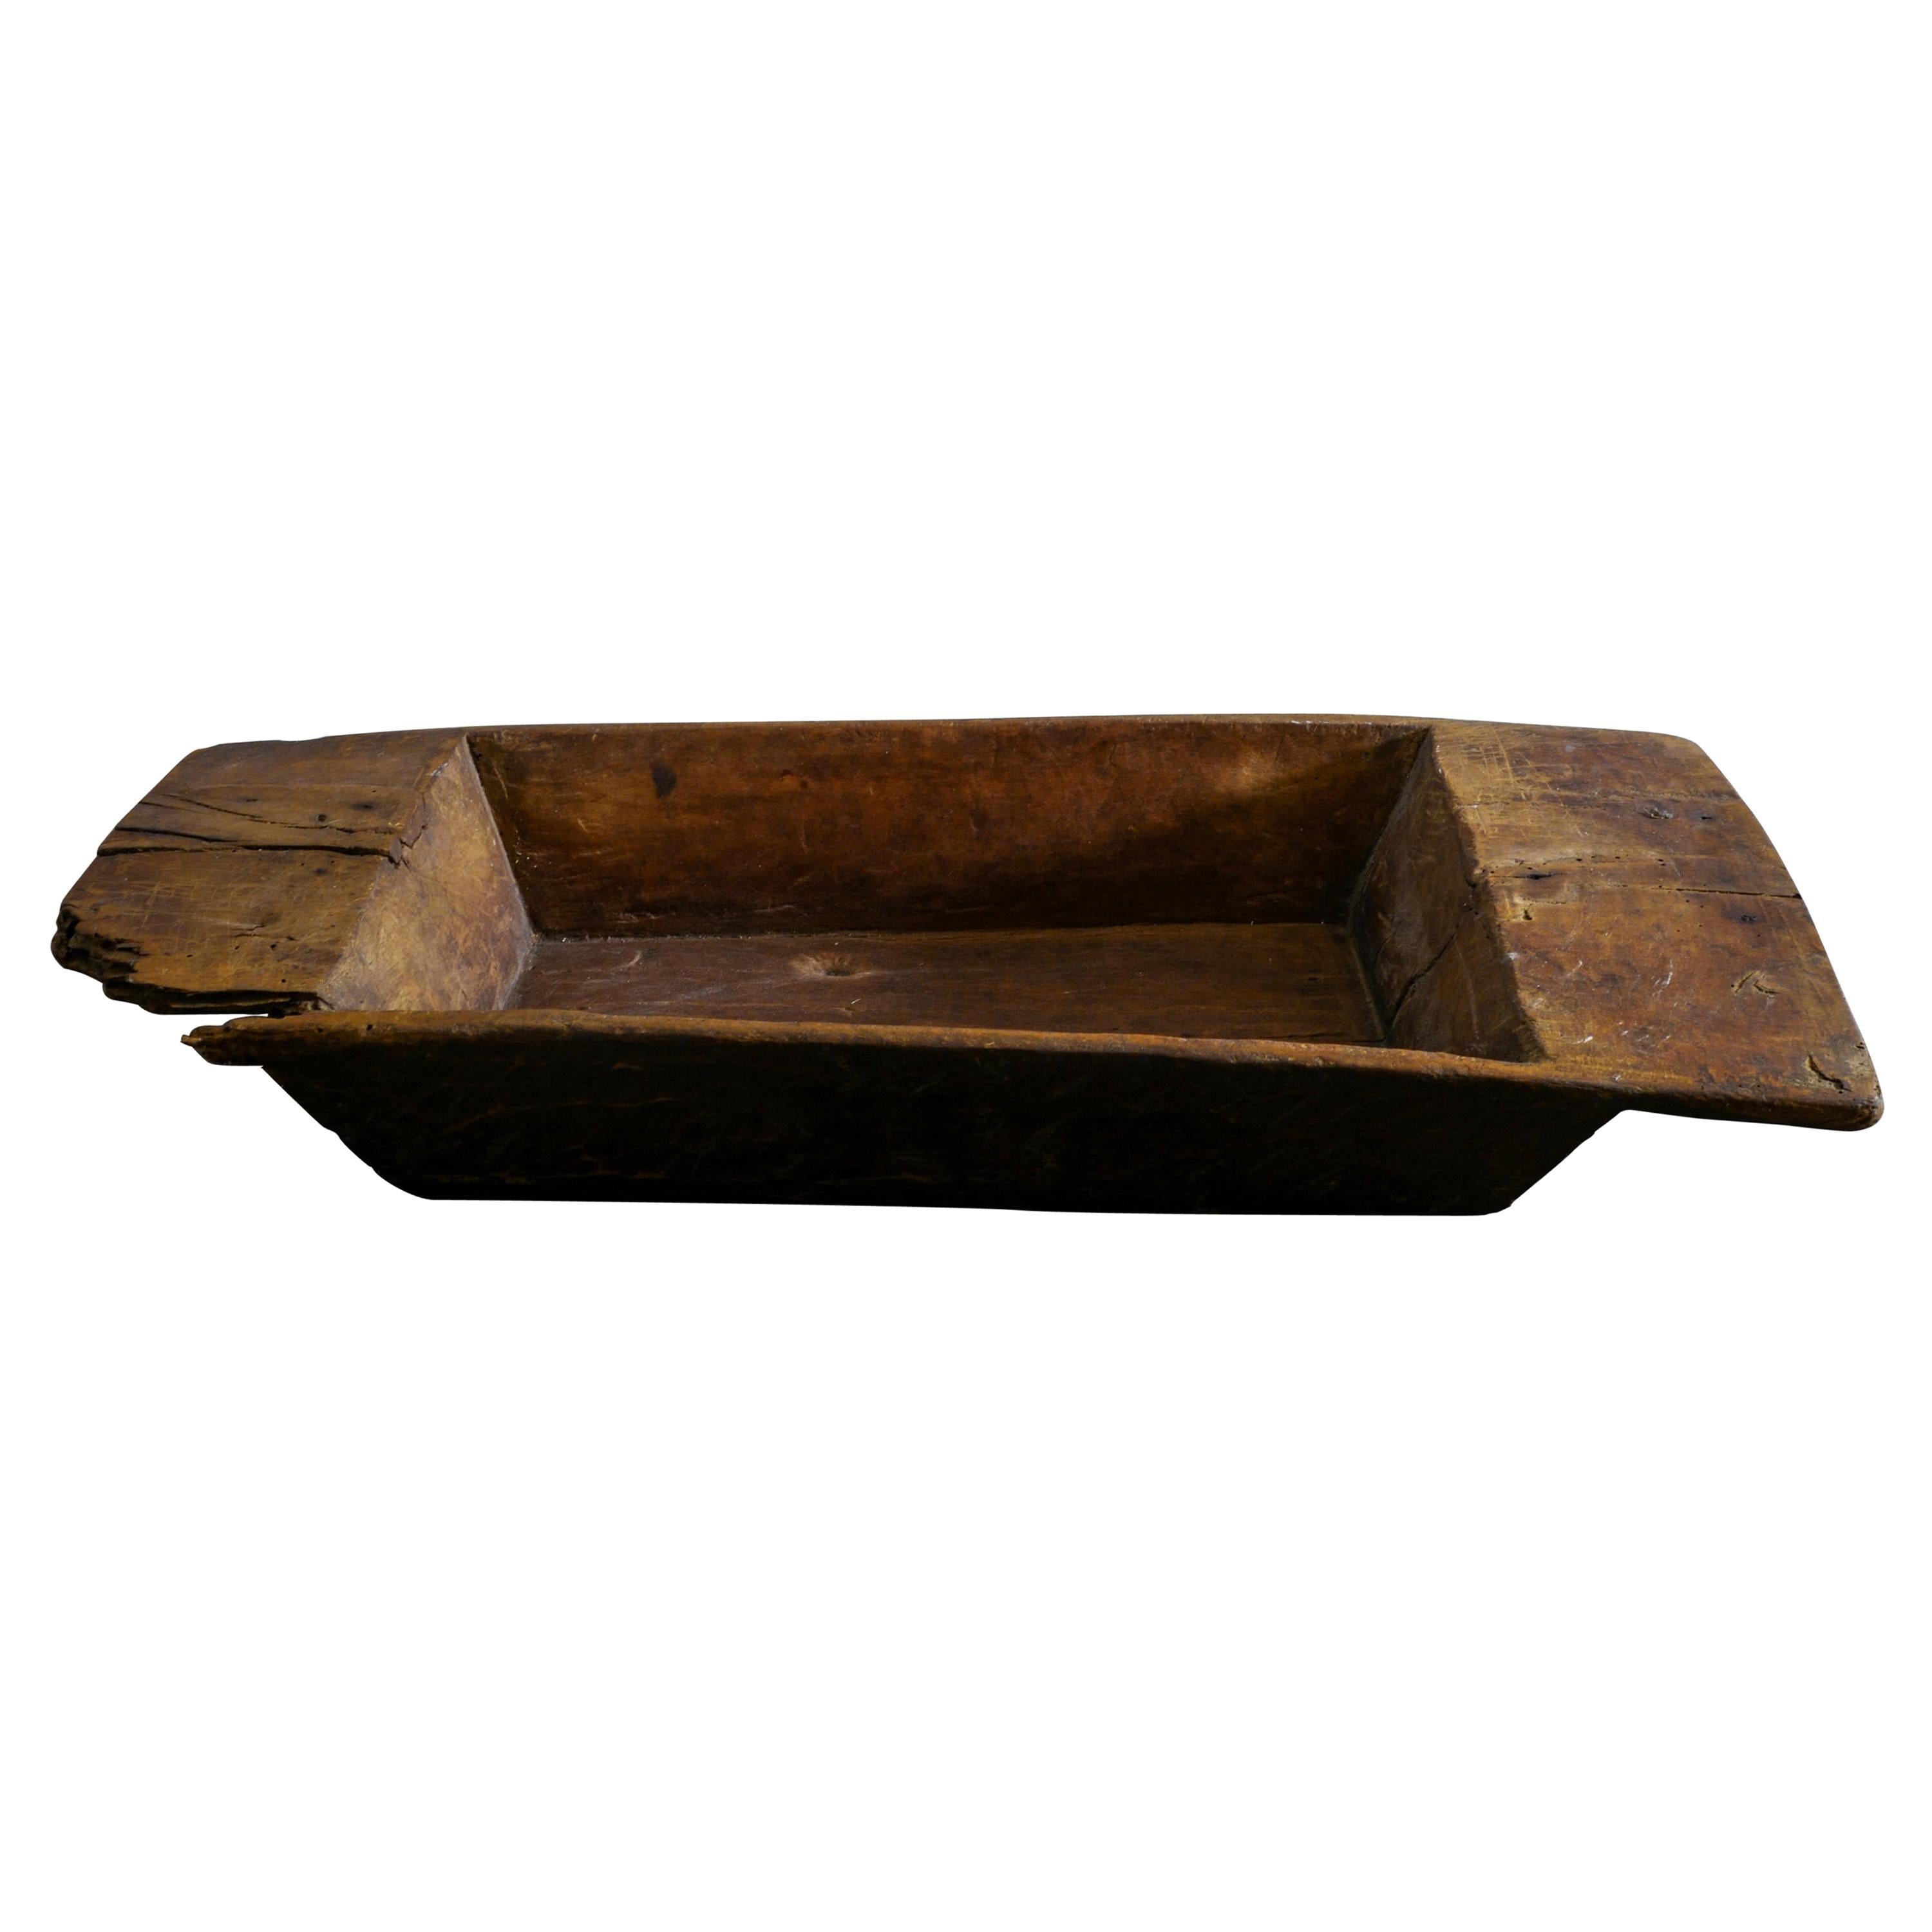 Swedish Wooden Tray in a Brutalist and Wabi Sabi Style, Late 1800s